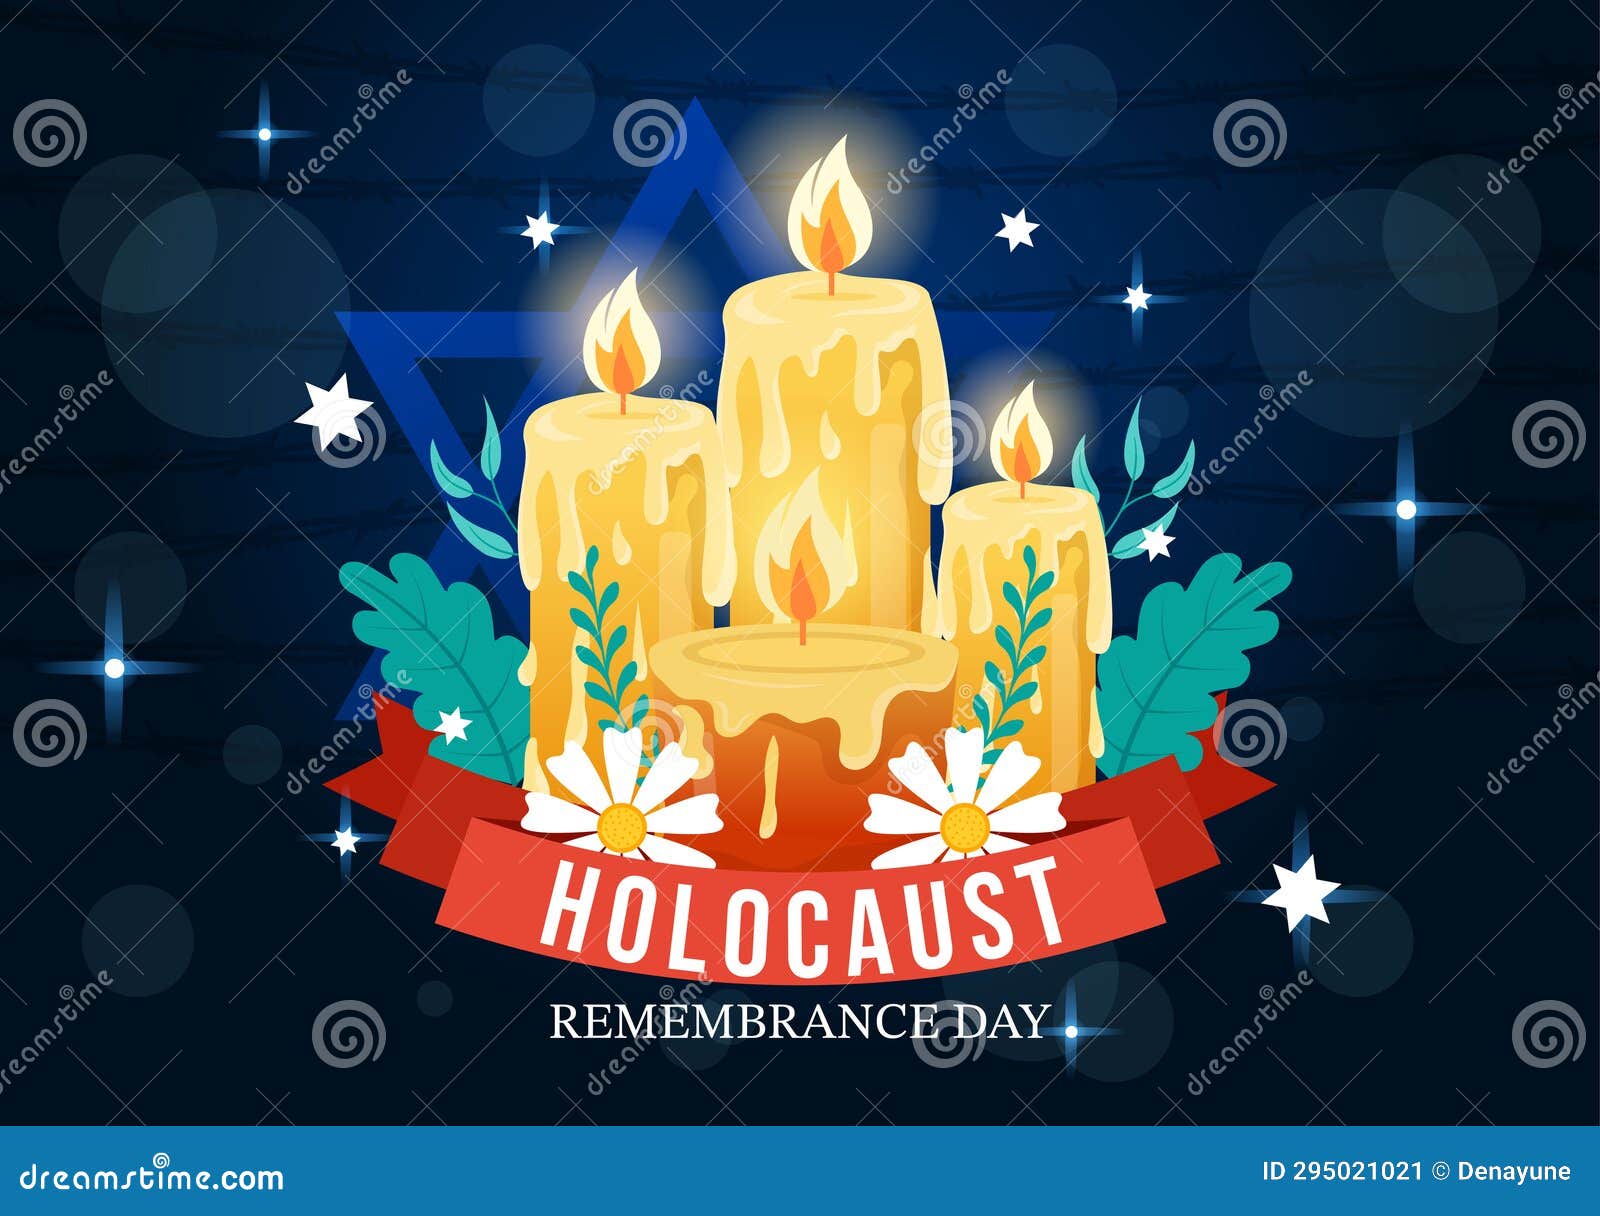 international holocaust remembrance day   on 27 january with yellow star and candle to commemorates the victims